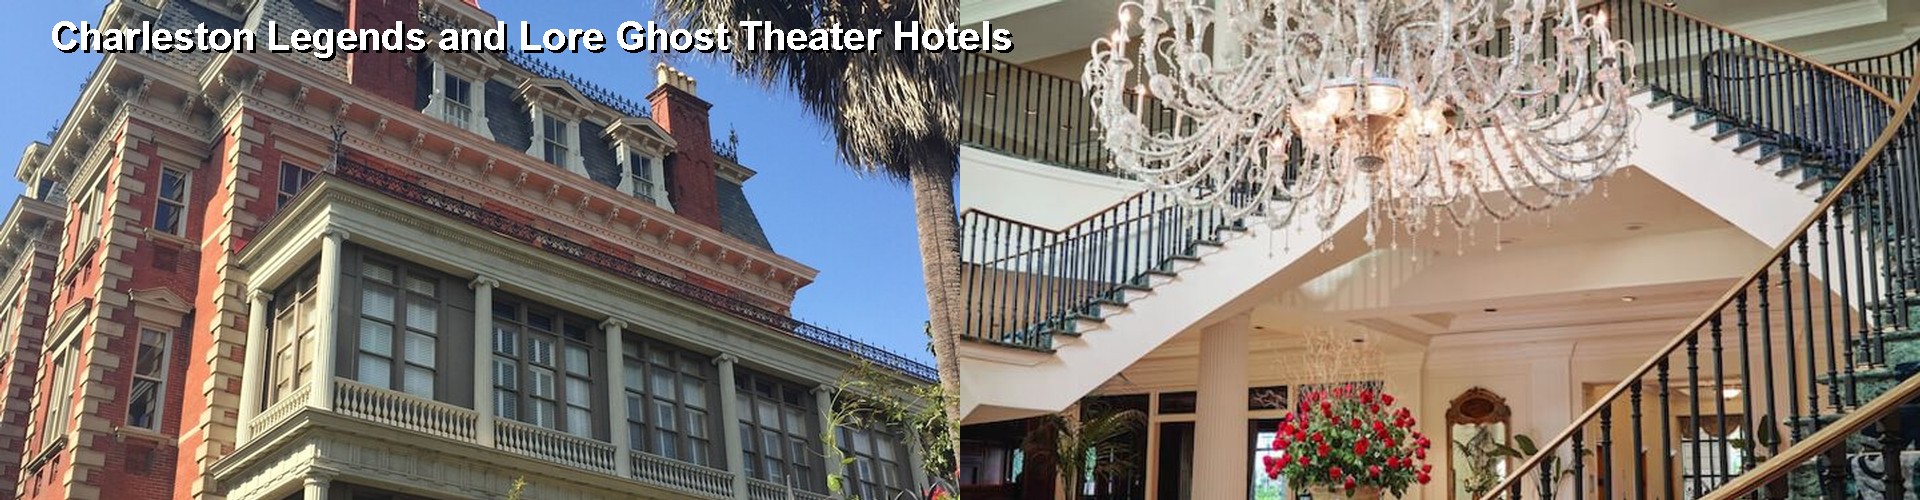 5 Best Hotels near Charleston Legends and Lore Ghost Theater